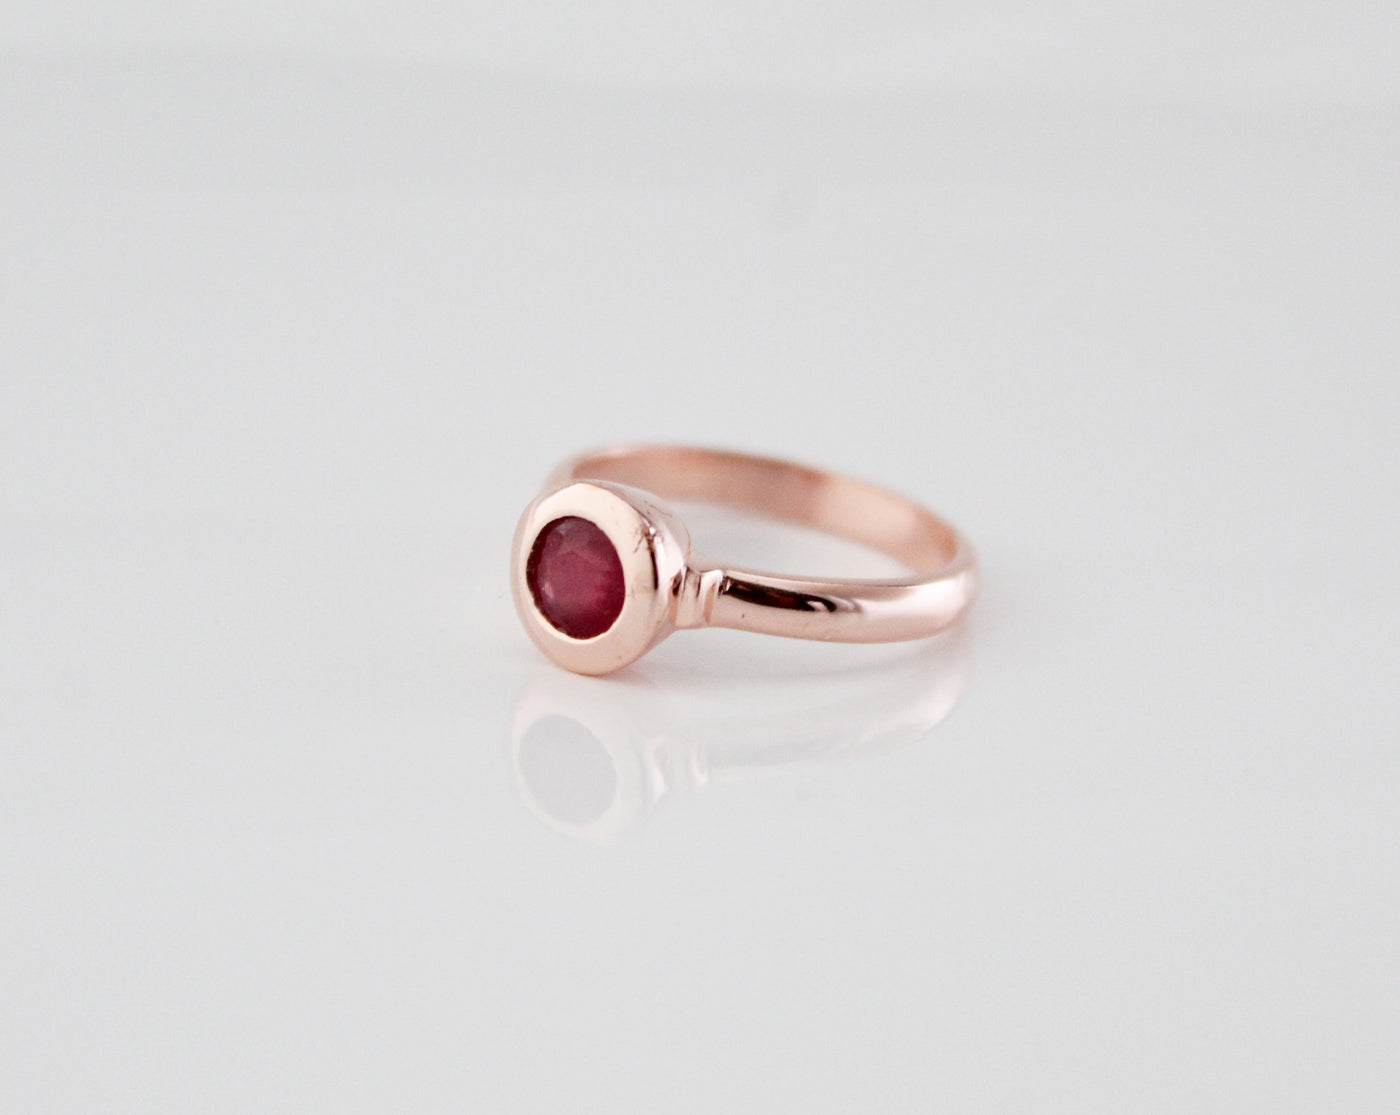 Ruby Ring Solid Silver, 925 Sterling Silver,Bridesmaid Gift, Minimalist Ring, Radiant Ruby Ring in Gold, genuine ruby ring, anniversary gift